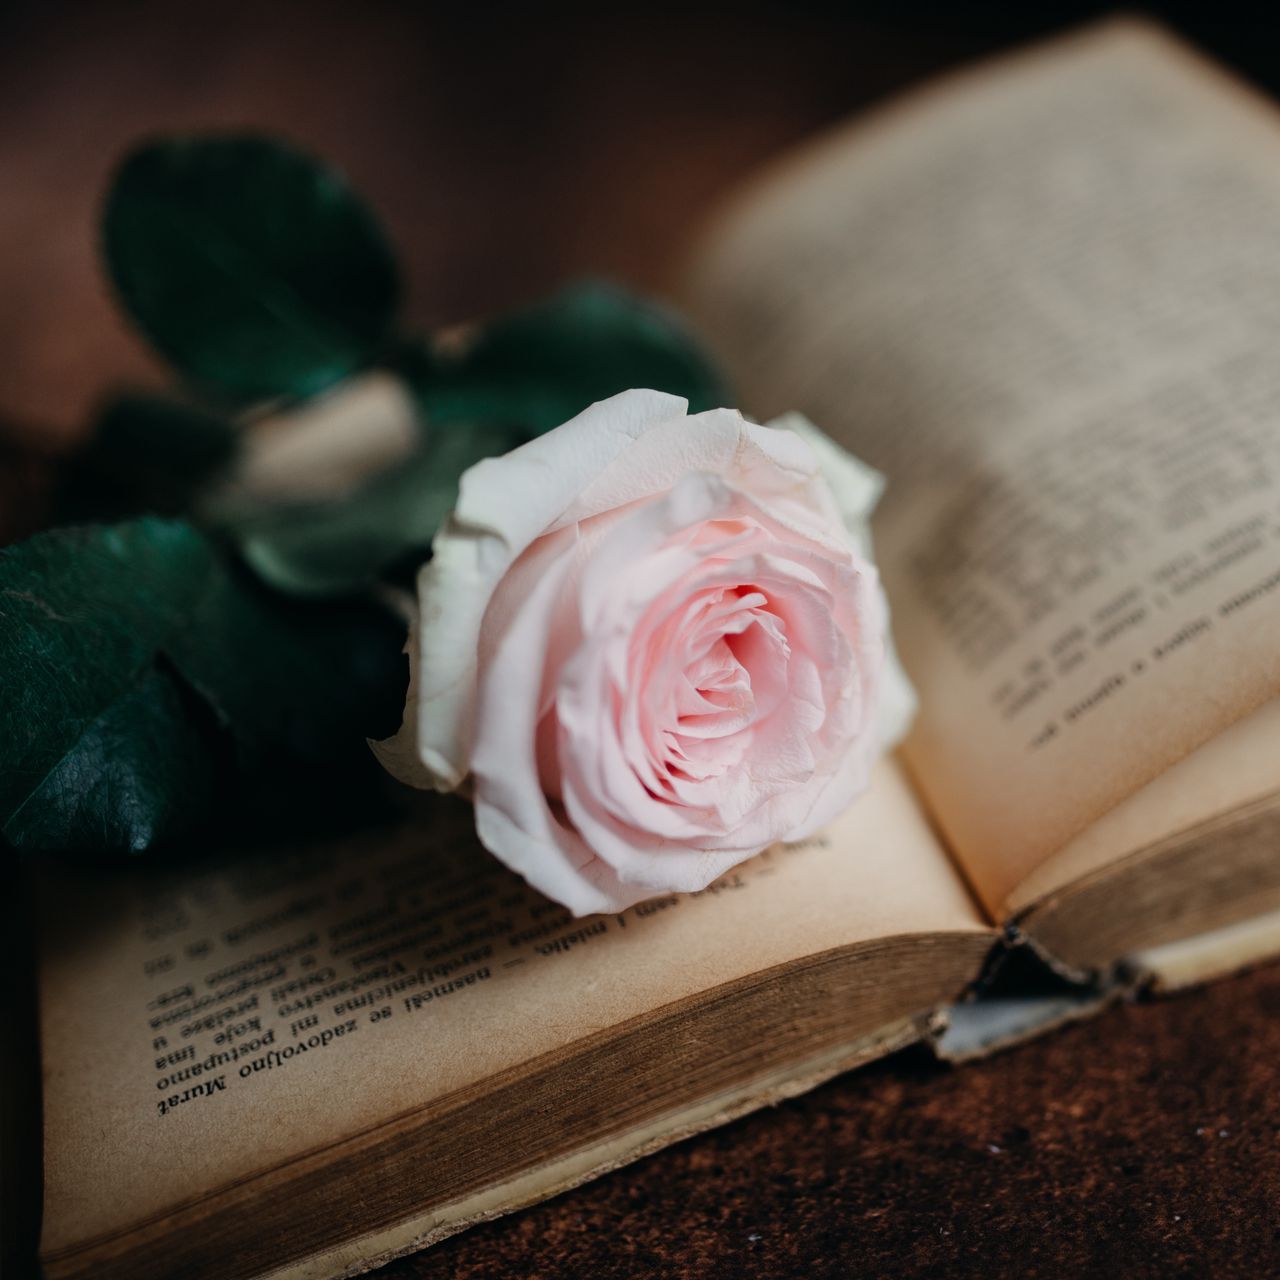 A rose is sitting on top of an open book - Books, roses, flower